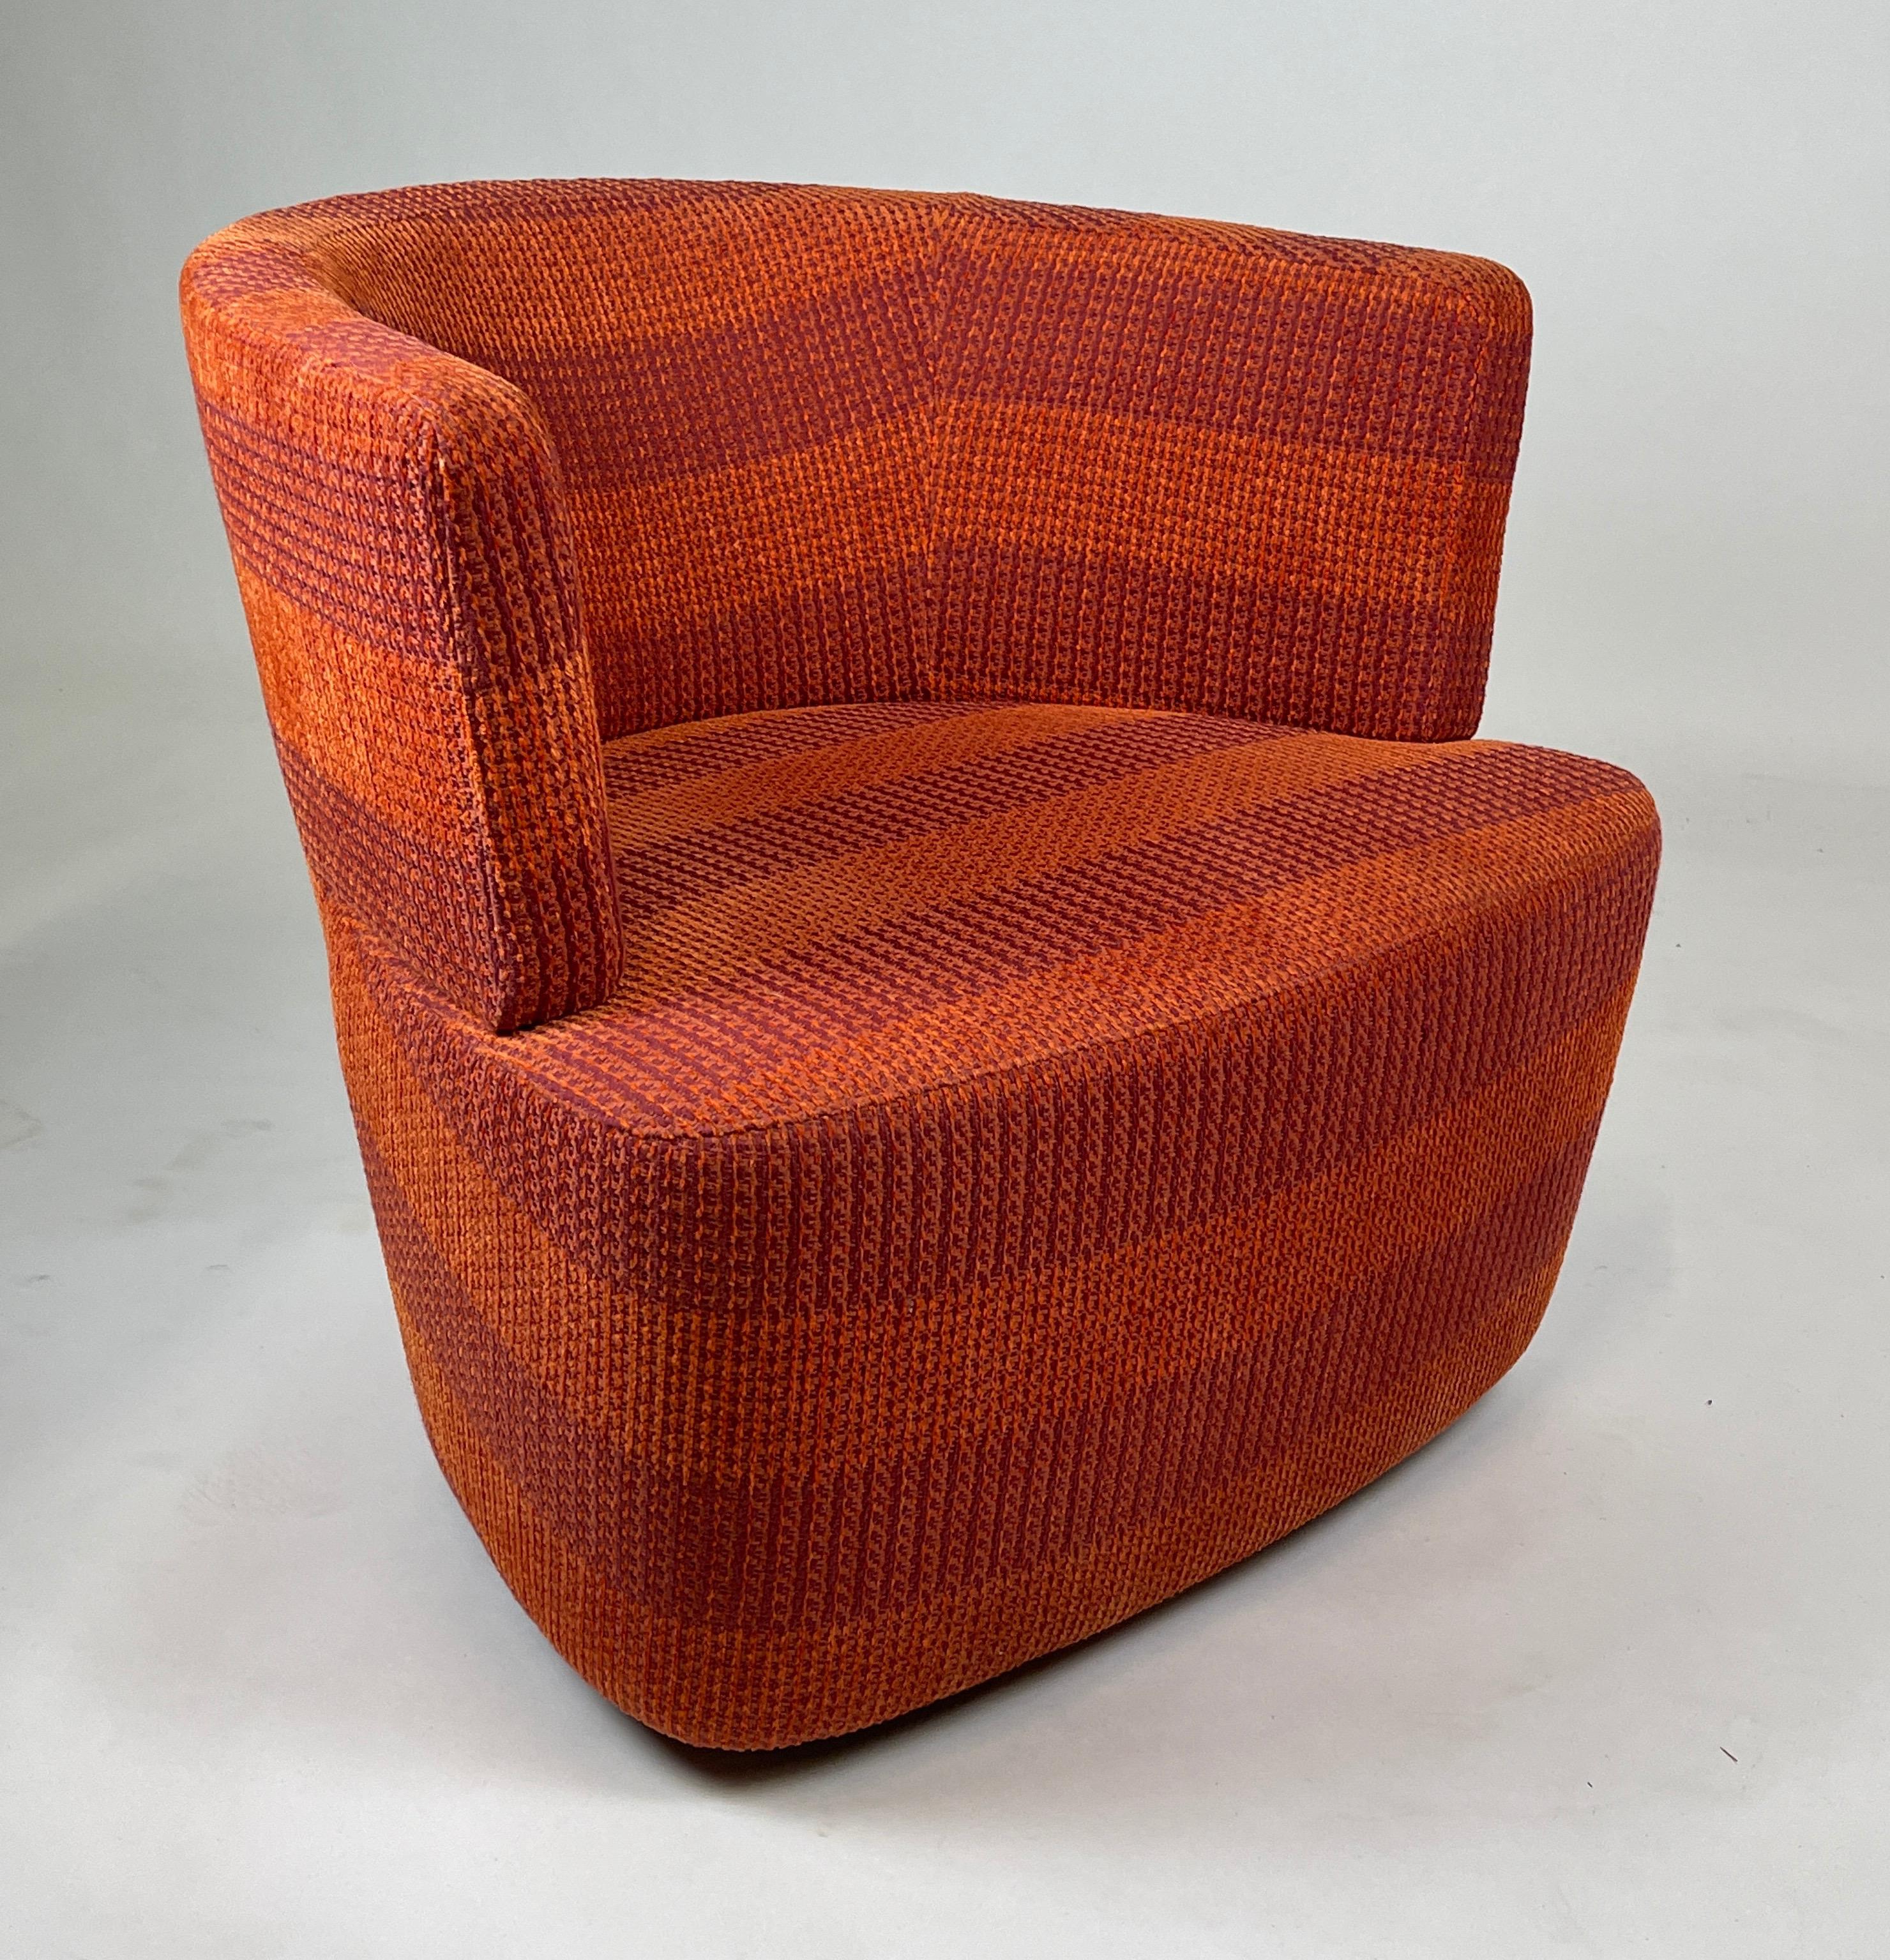 Upholstery Pair of Excellent Orange and Red Heavy Weave Bucket Swivel Chairs on Chrome Base